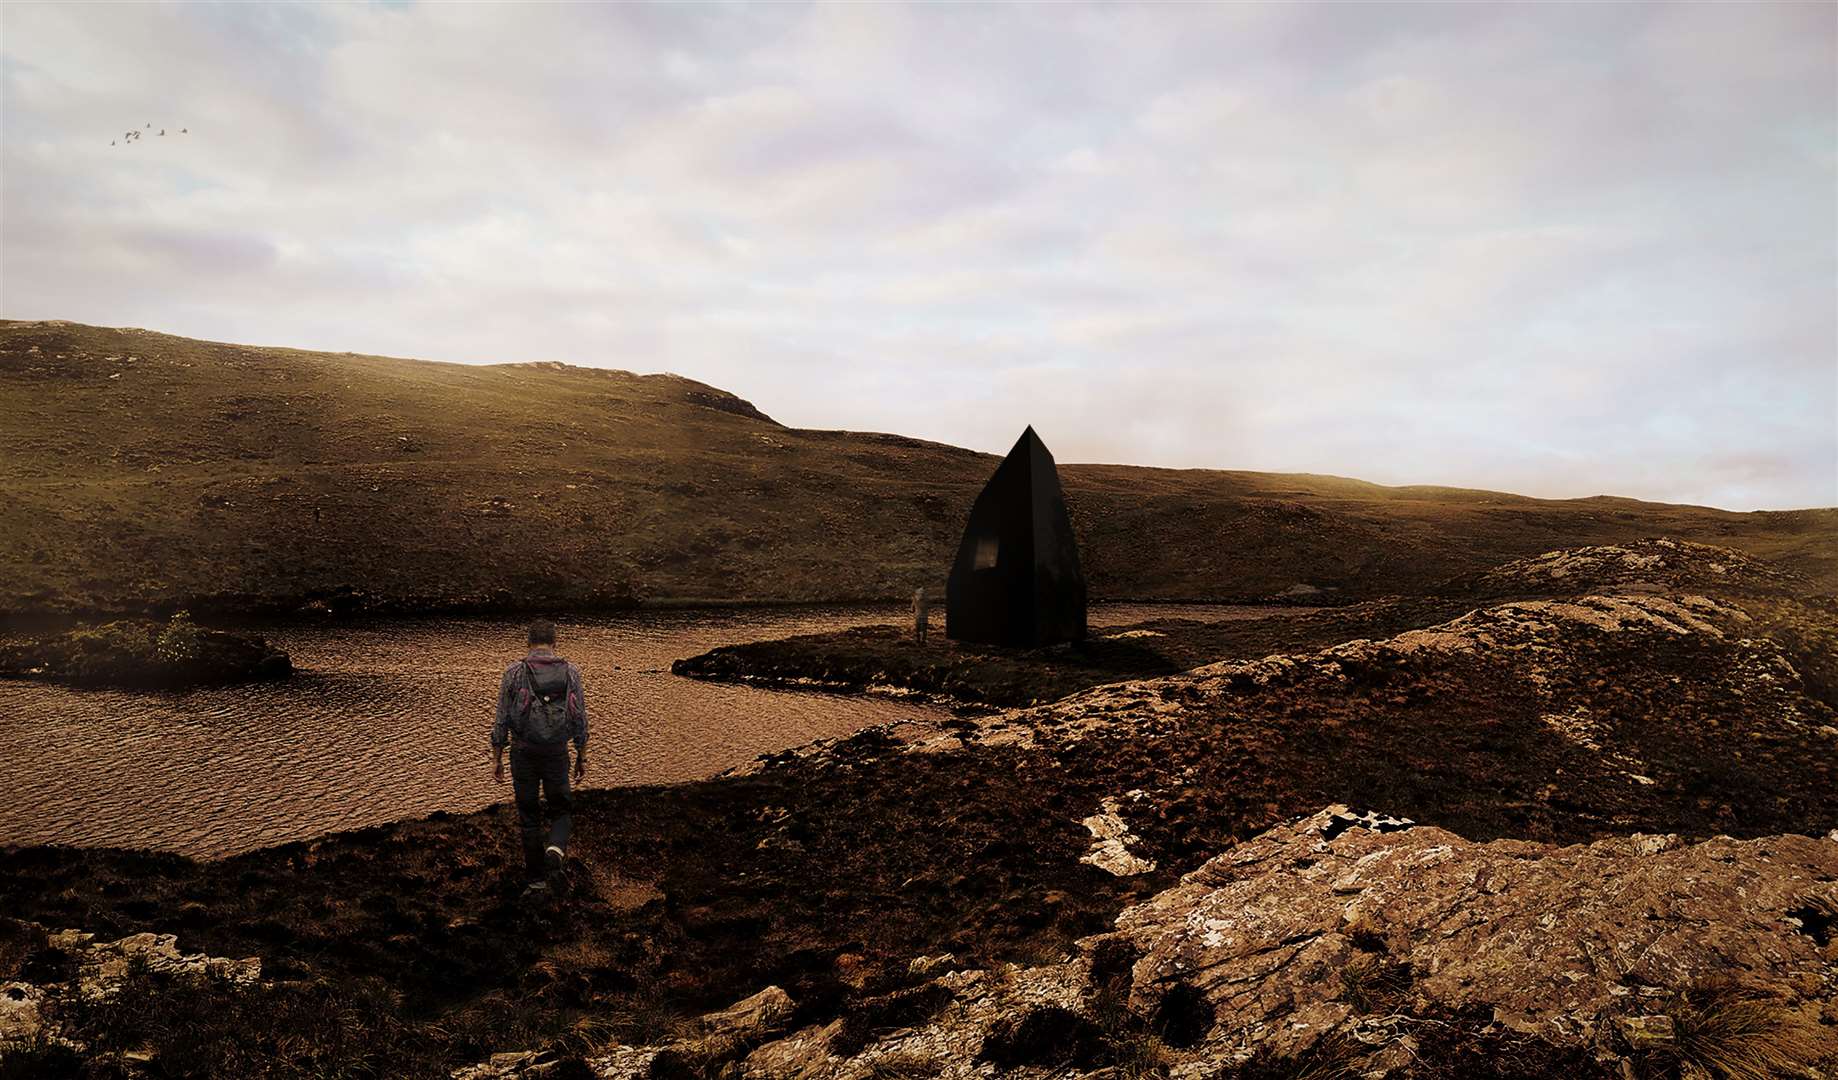 A computer image of how the new bothies might look in the remote landscape.